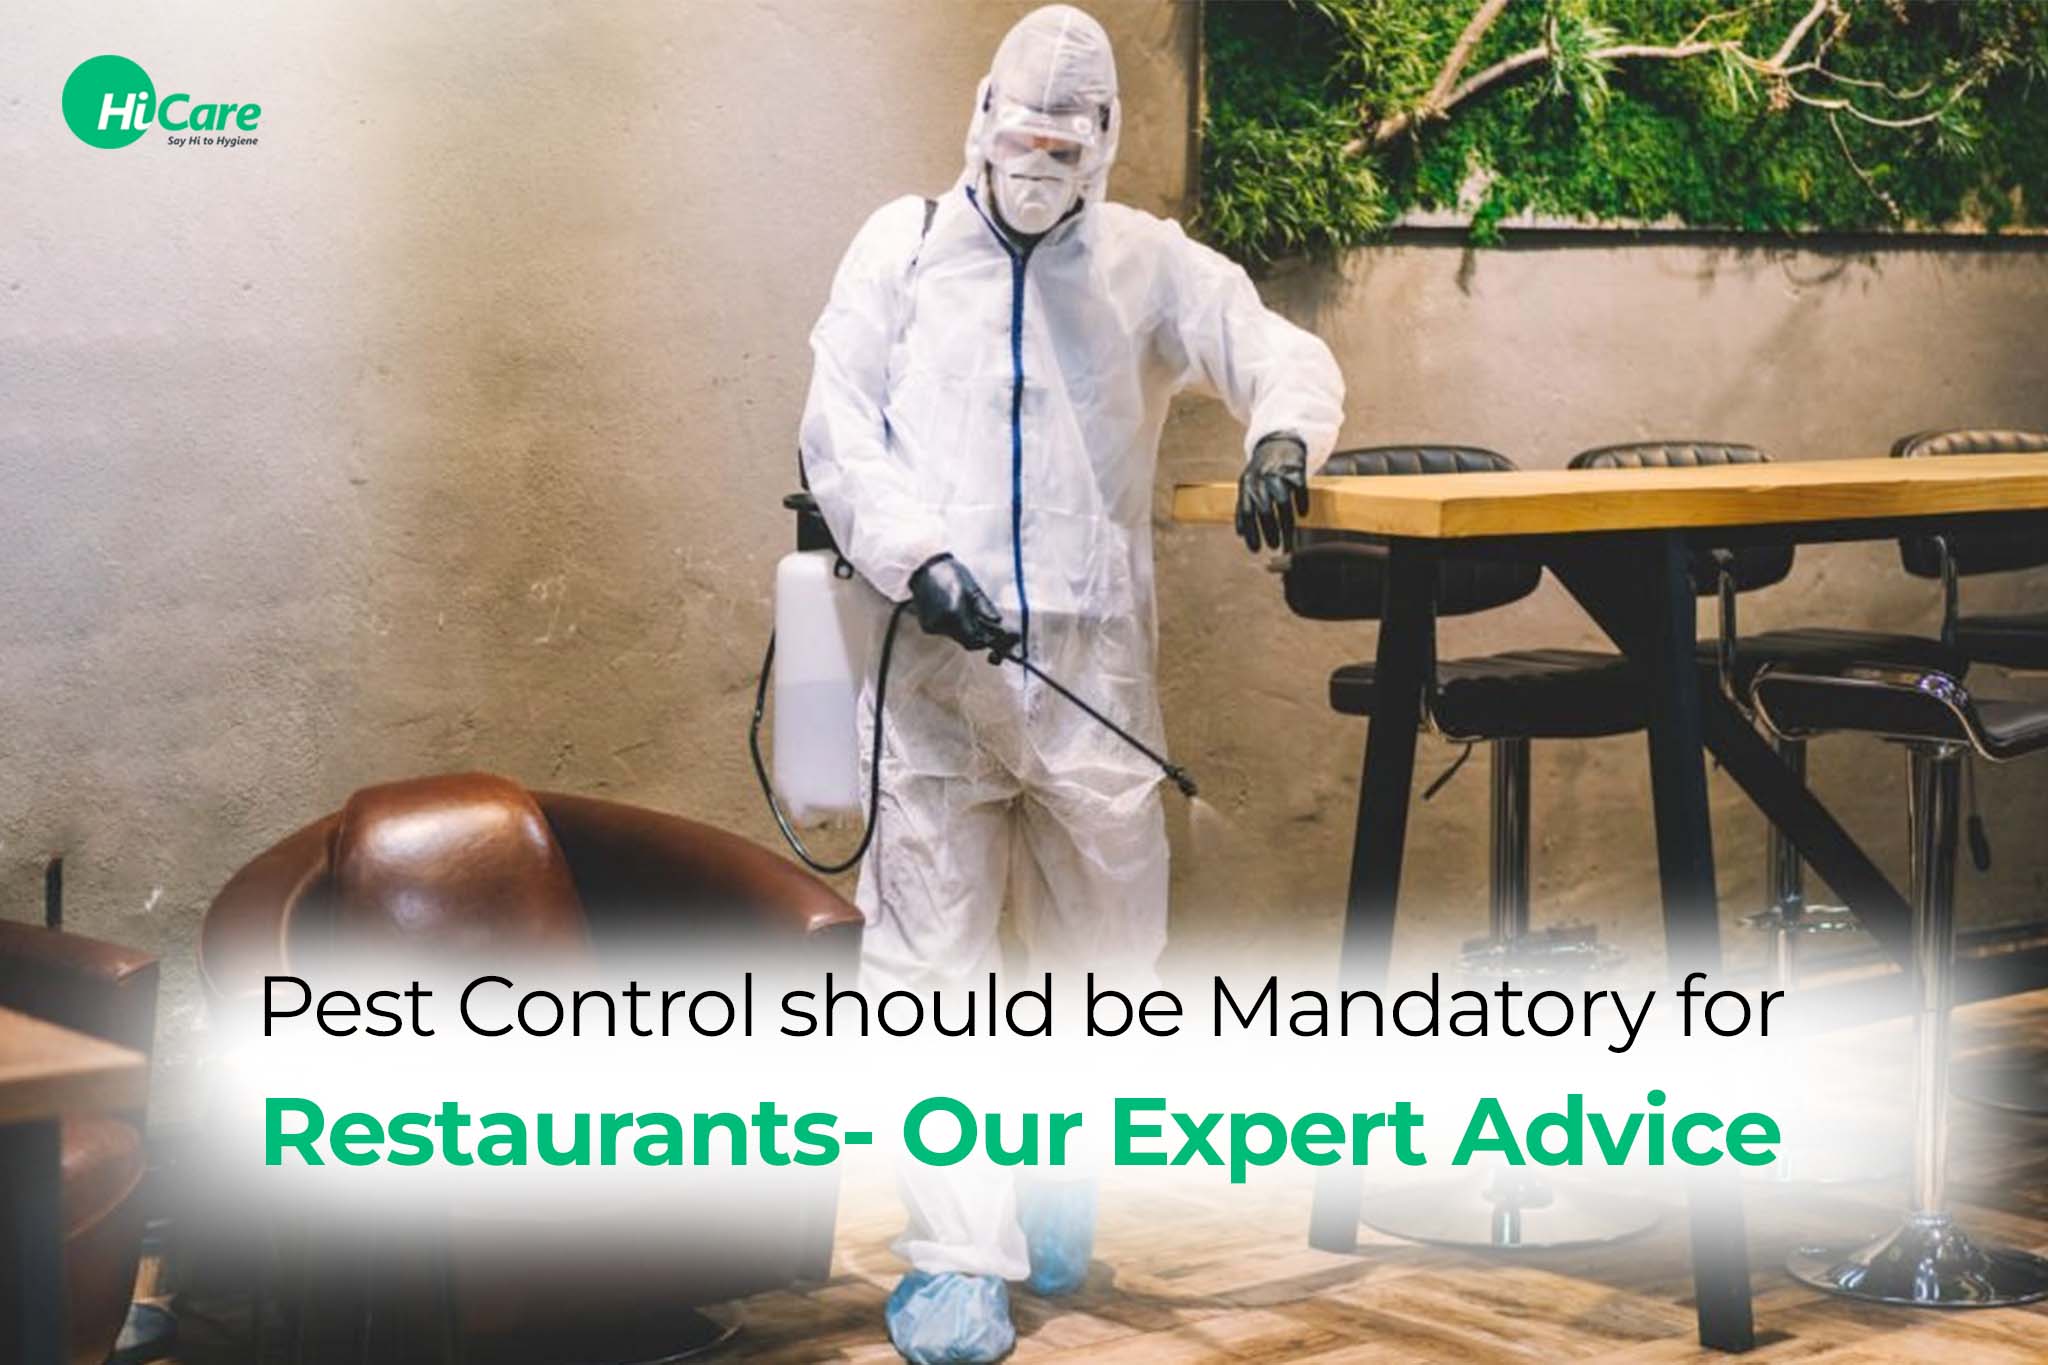 pest control should be mandatory for restaurants - our expert advice